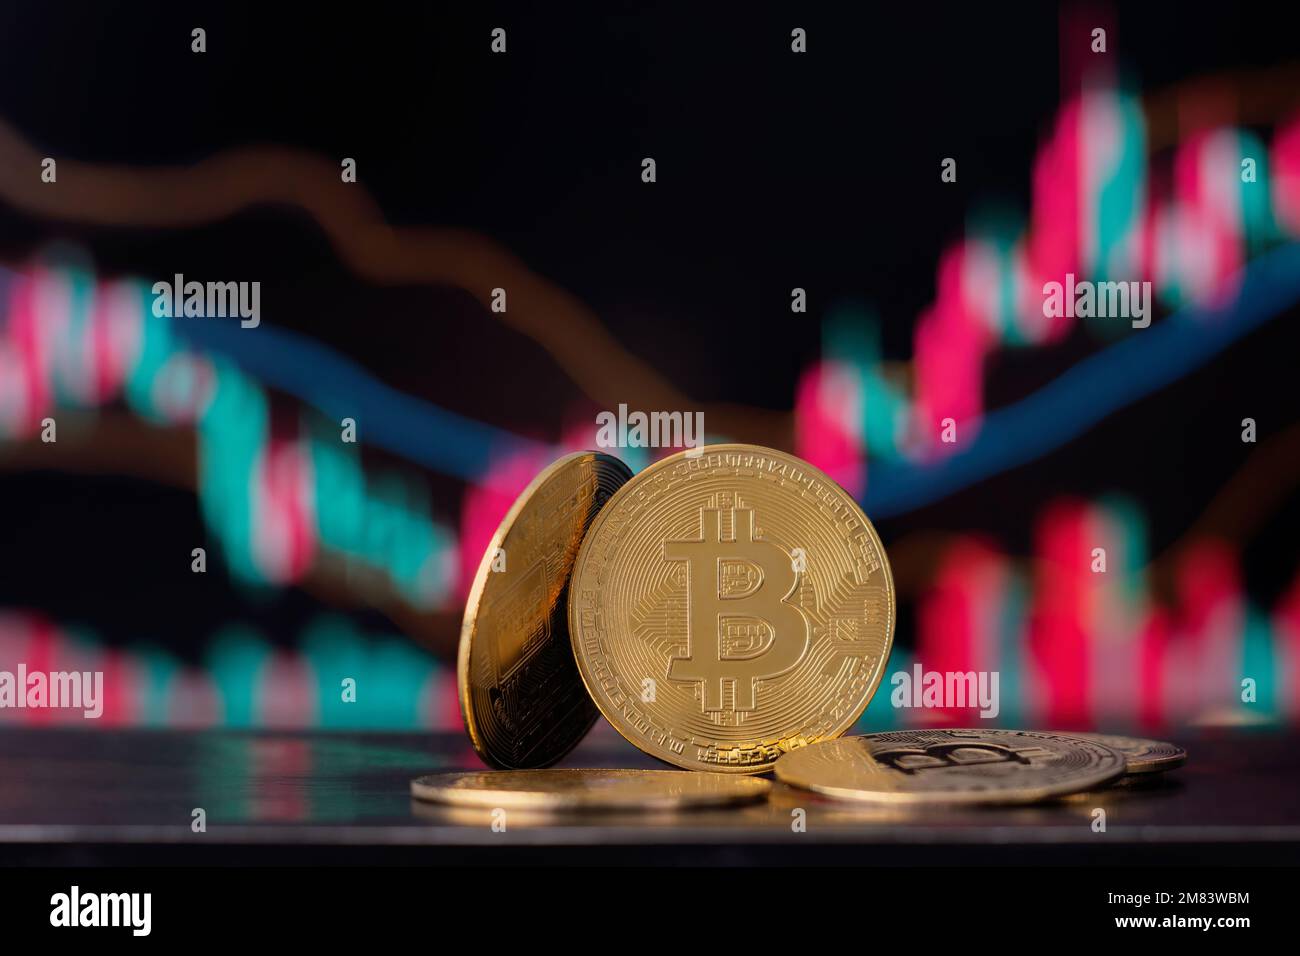 Bitcoin cryptocurrency coins on graphic diagram background. Stock Photo